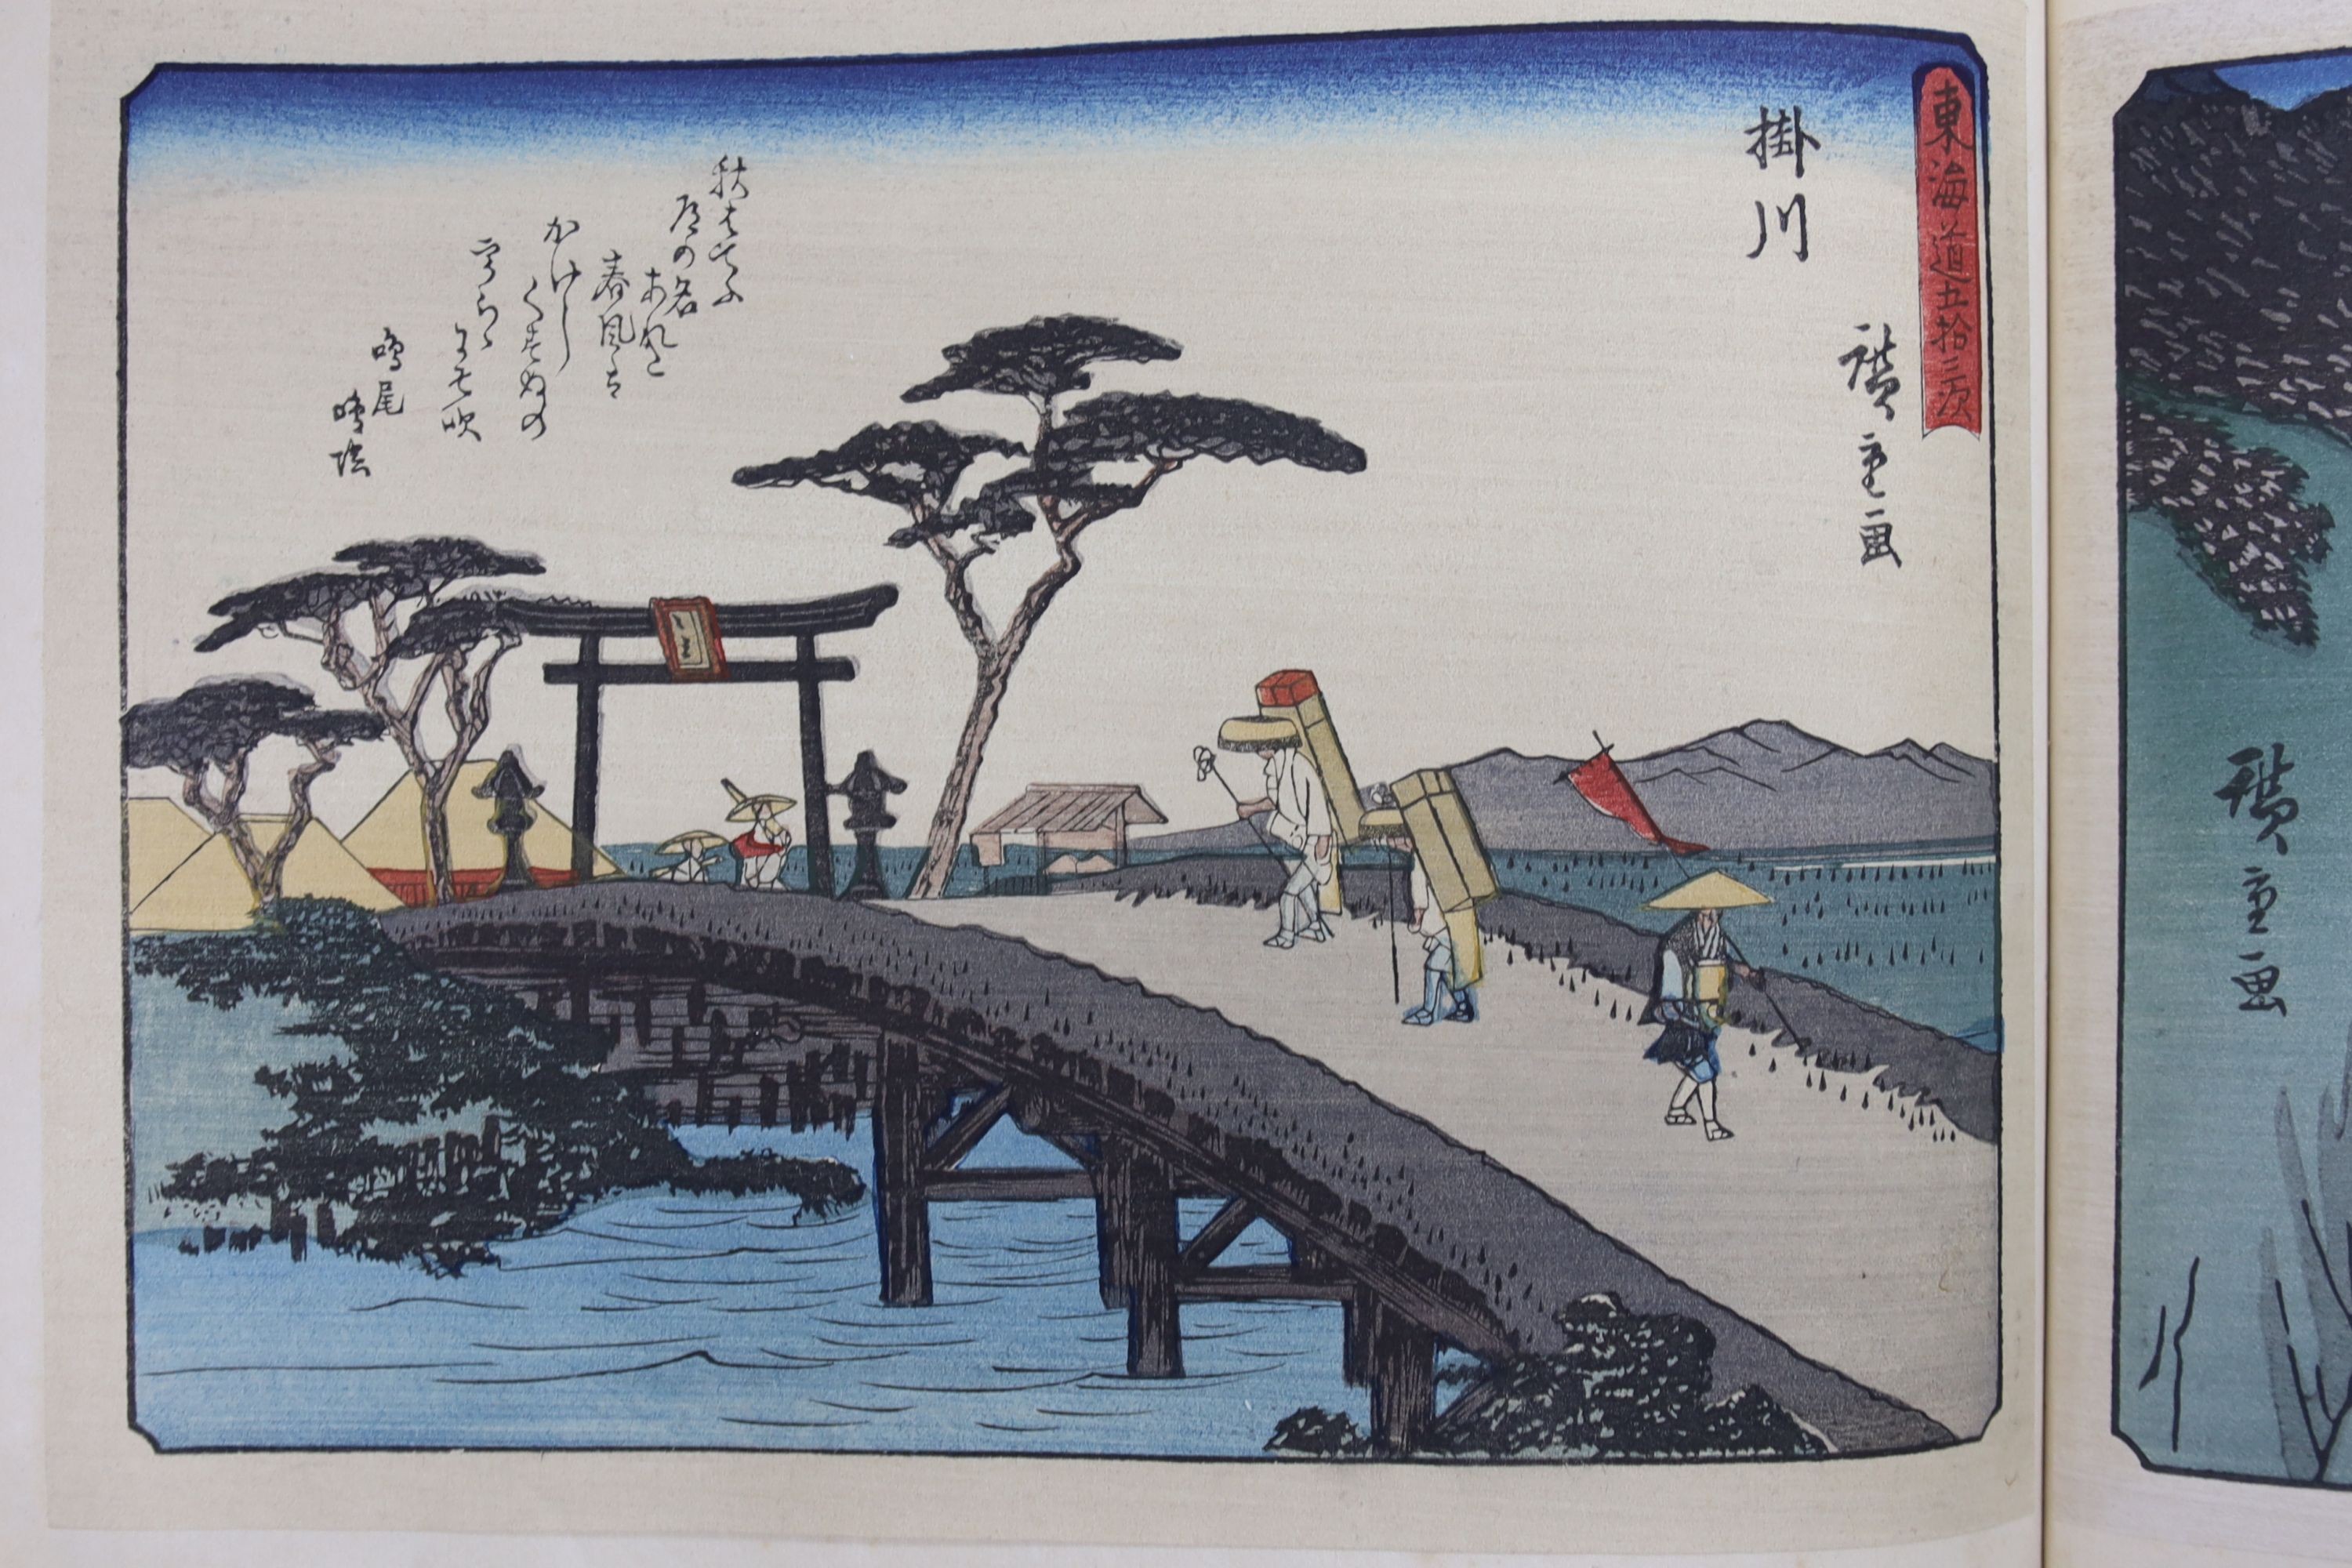 After Hiroshige, an album of 56 woodblock prints including the 53 Stations of the Tokaido, 4th year Taisho period (1916), images 19 x 2